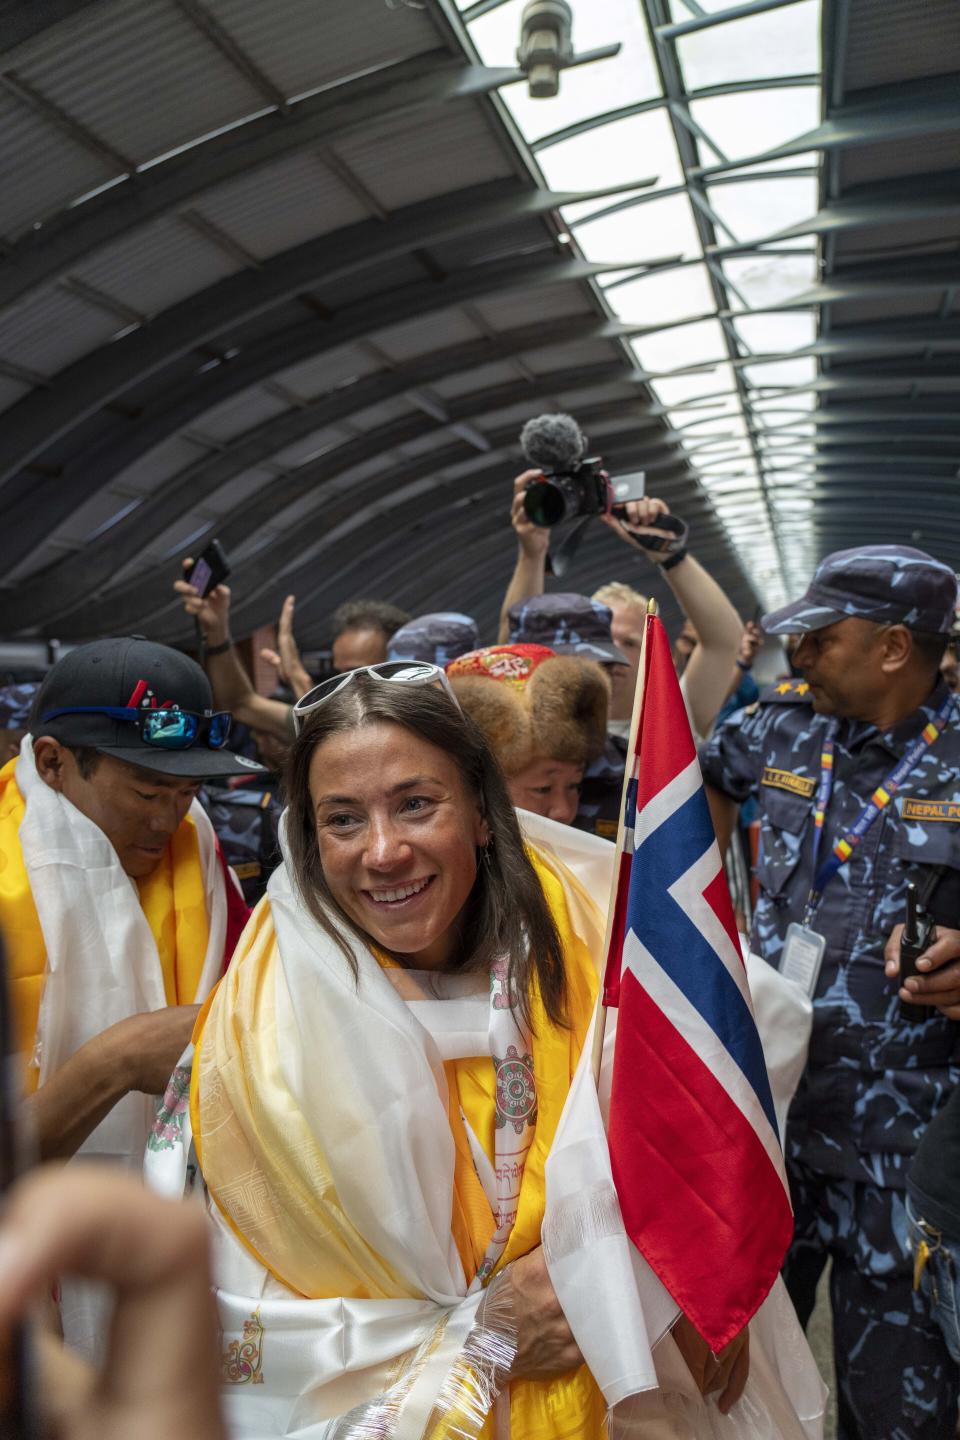 Norwegian woman mountain climber Kristin Harila, center who on Thursday set a new record by scaling the world's 14 highest peaks in 92 days smiles as she and her Nepali Sherpa guide Tenjen Sherpa, arrive at the airport in Kathmandu, Nepal, Saturday, Aug.5, 2023. (AP Photo/Niranjan Shreshta)